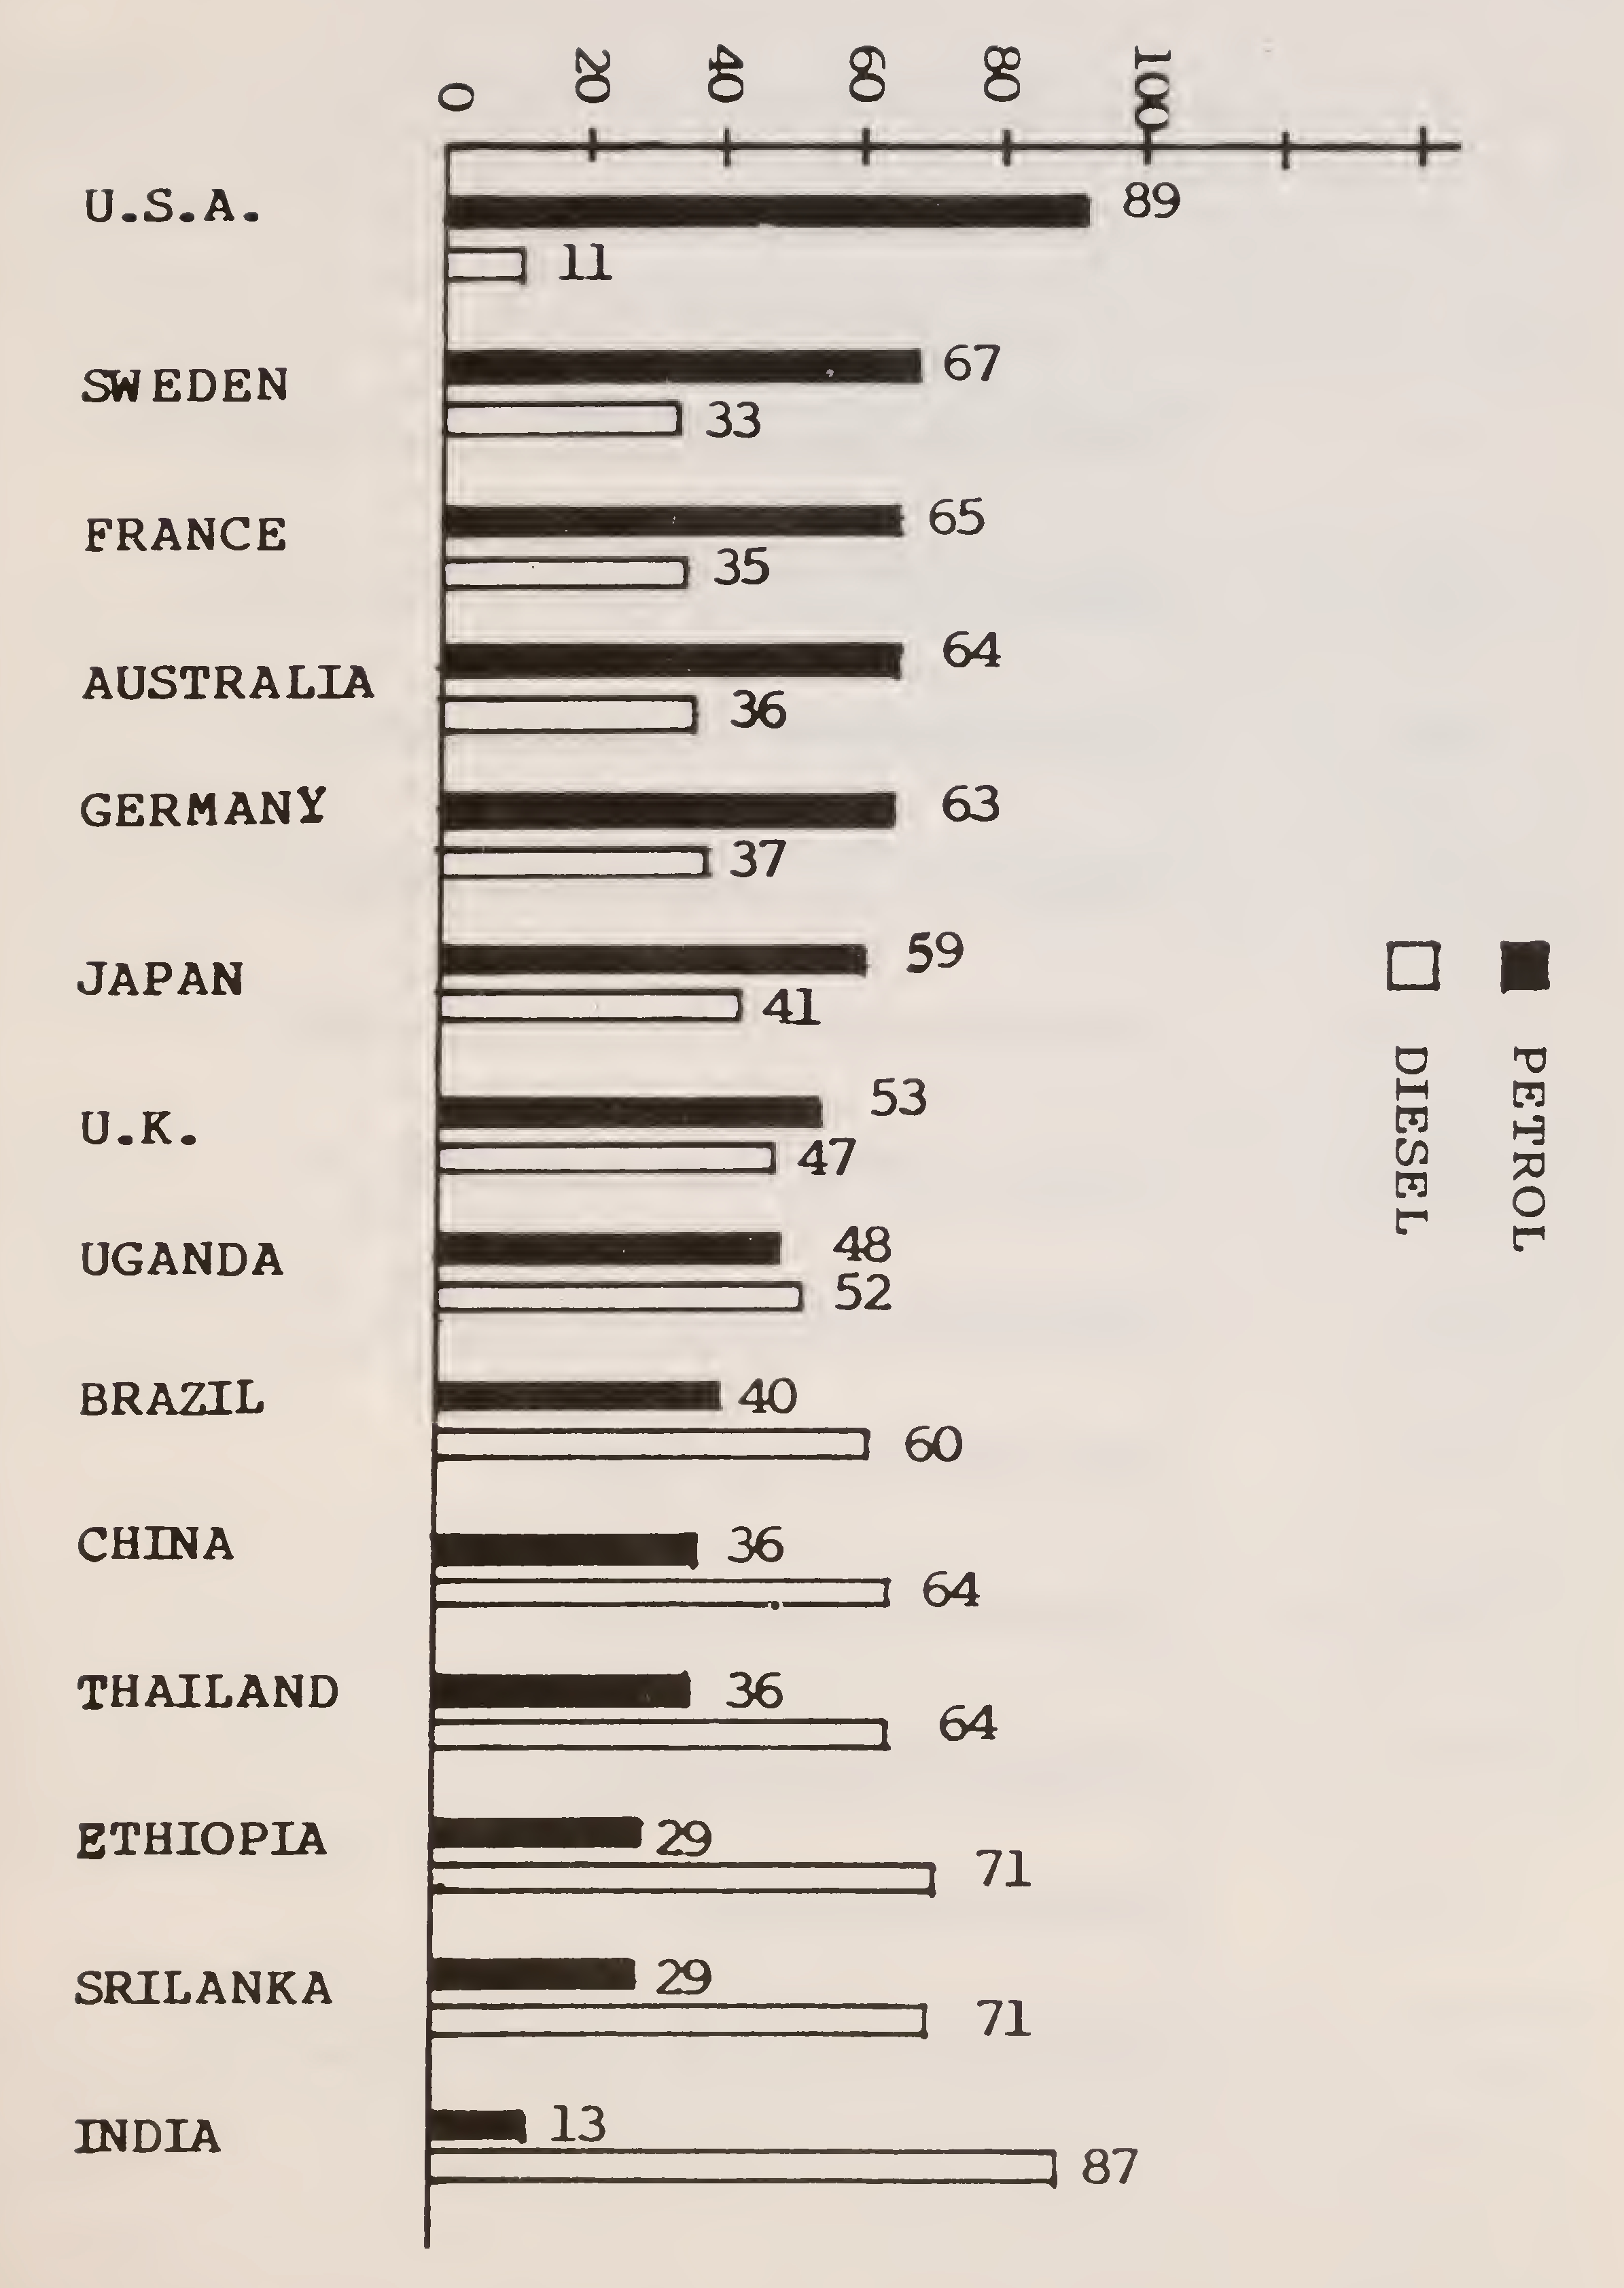 Fig. 13. Percentage share of petrol and diesel consumption in some selected countries